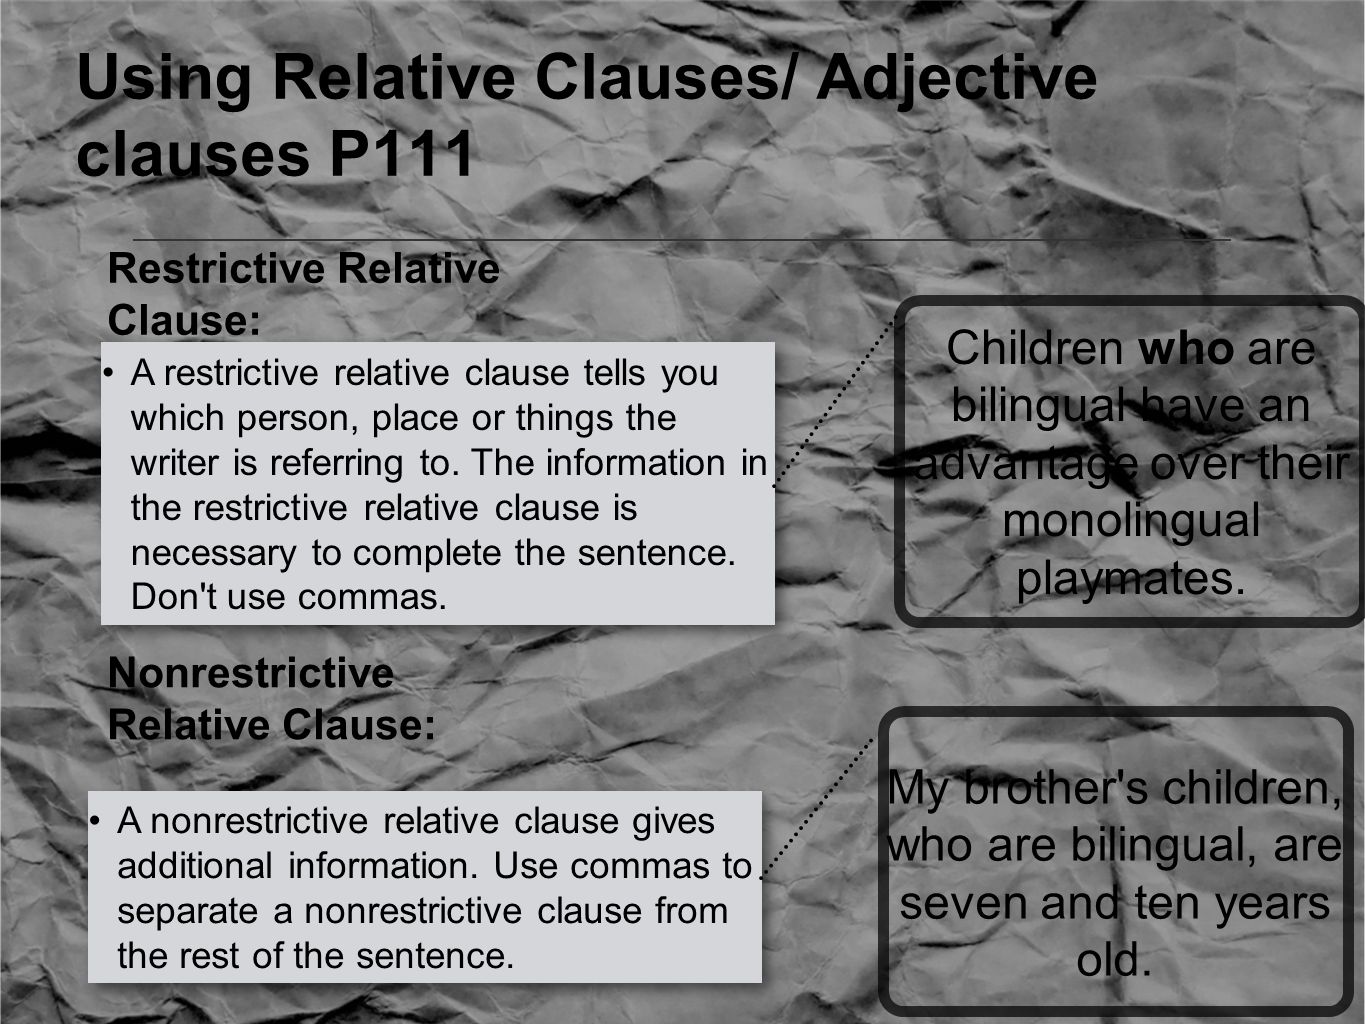 Using Relative Clauses/ Adjective clauses P111 A restrictive relative clause tells you which person, place or things the writer is referring to.